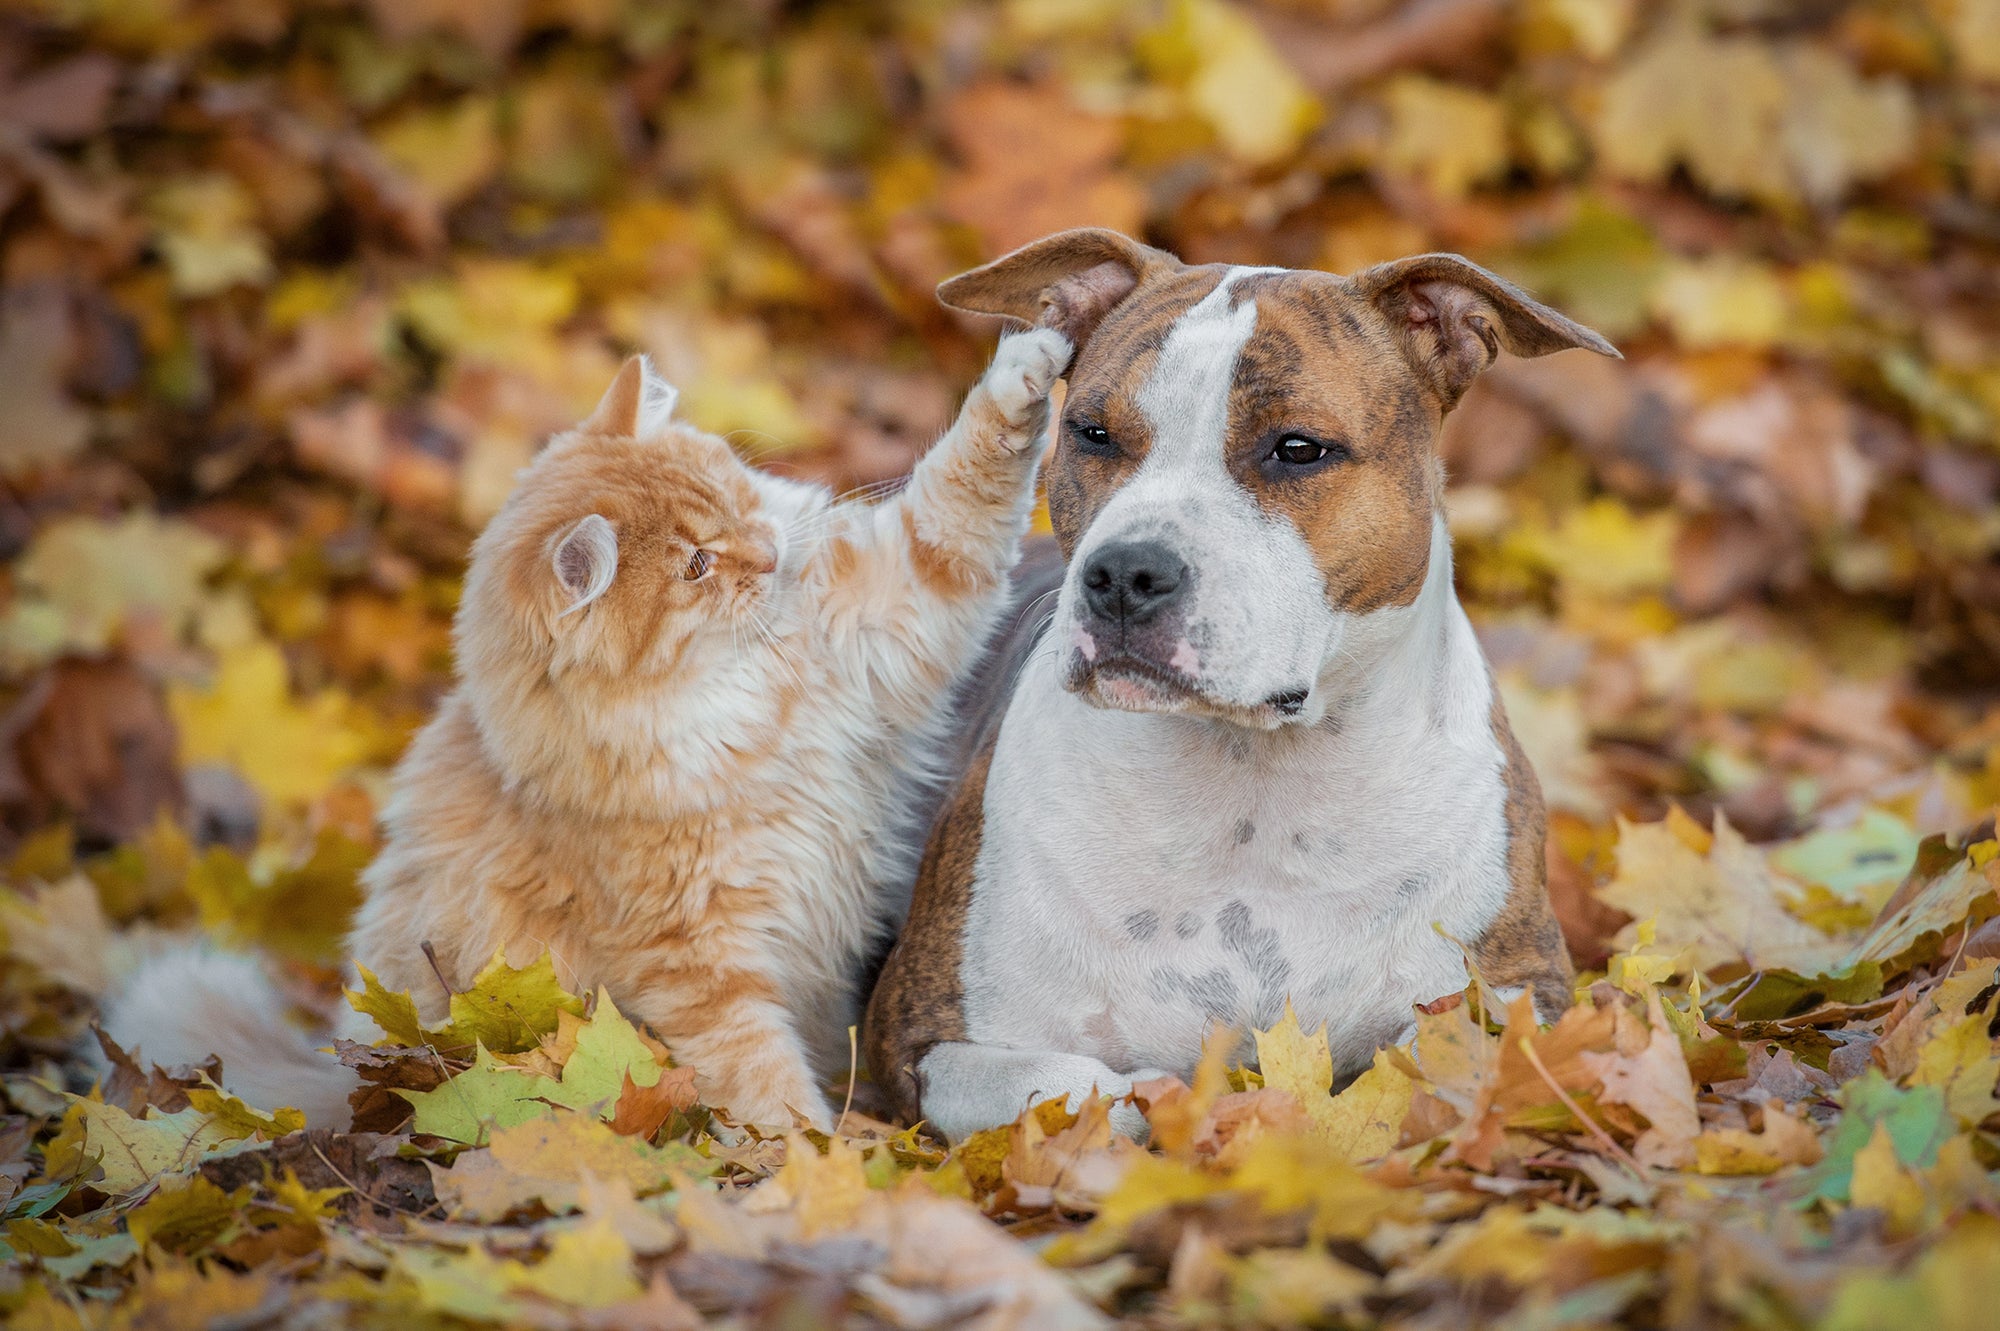 Cat and dog lying in leaves, dog's nose close up, cat with paw up, dog with paw on head, cat standing on back.